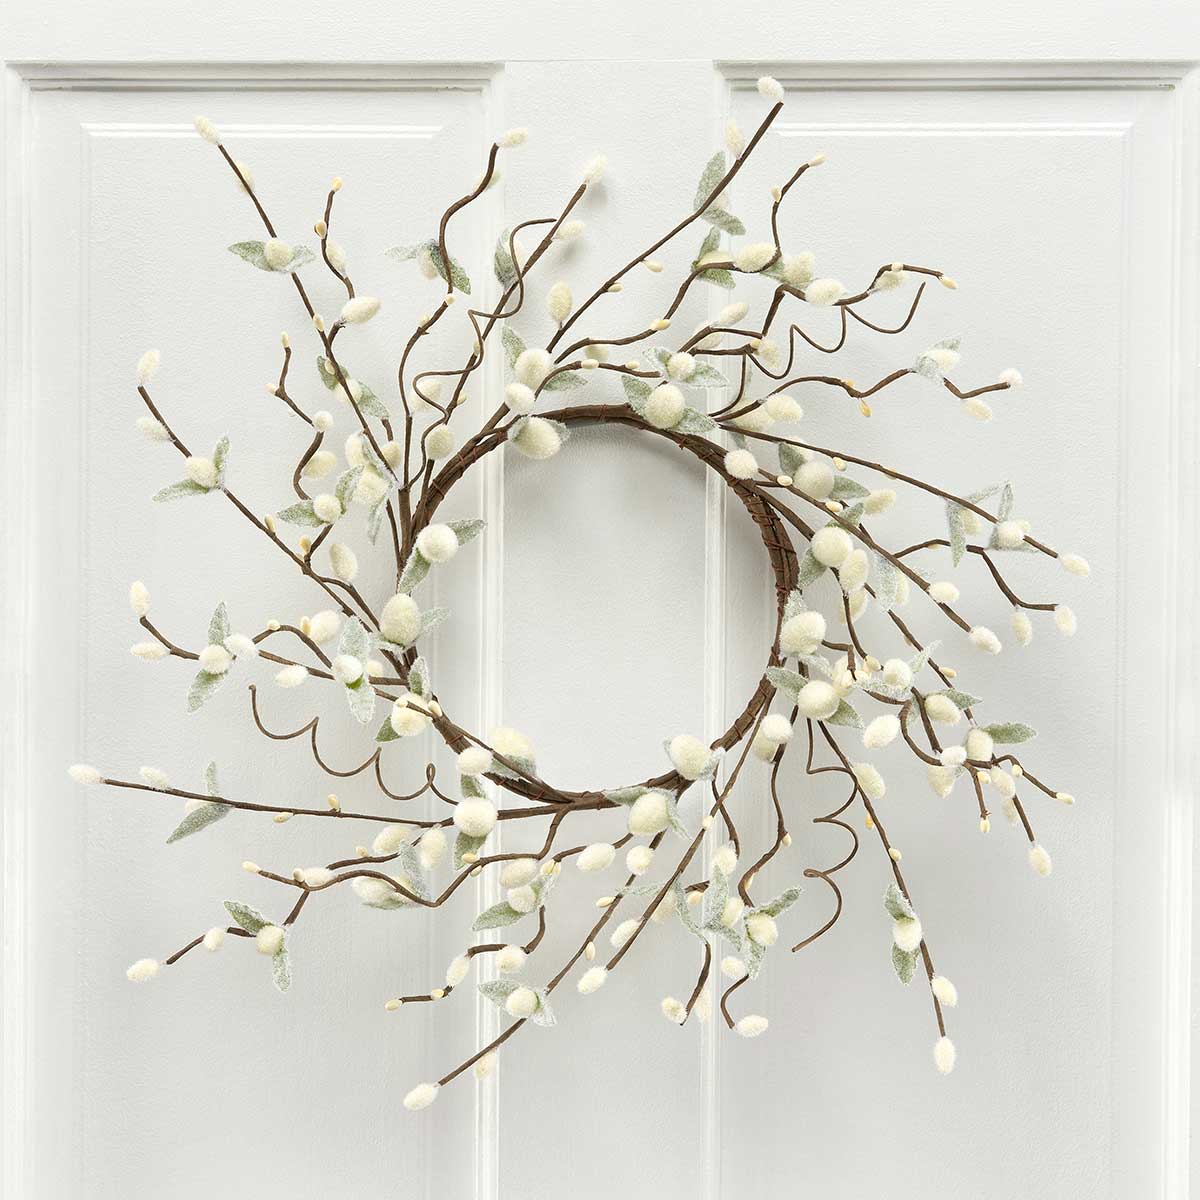 PUSSY WILLOW WREATH WITH WHITE PIP BERRIES 18"